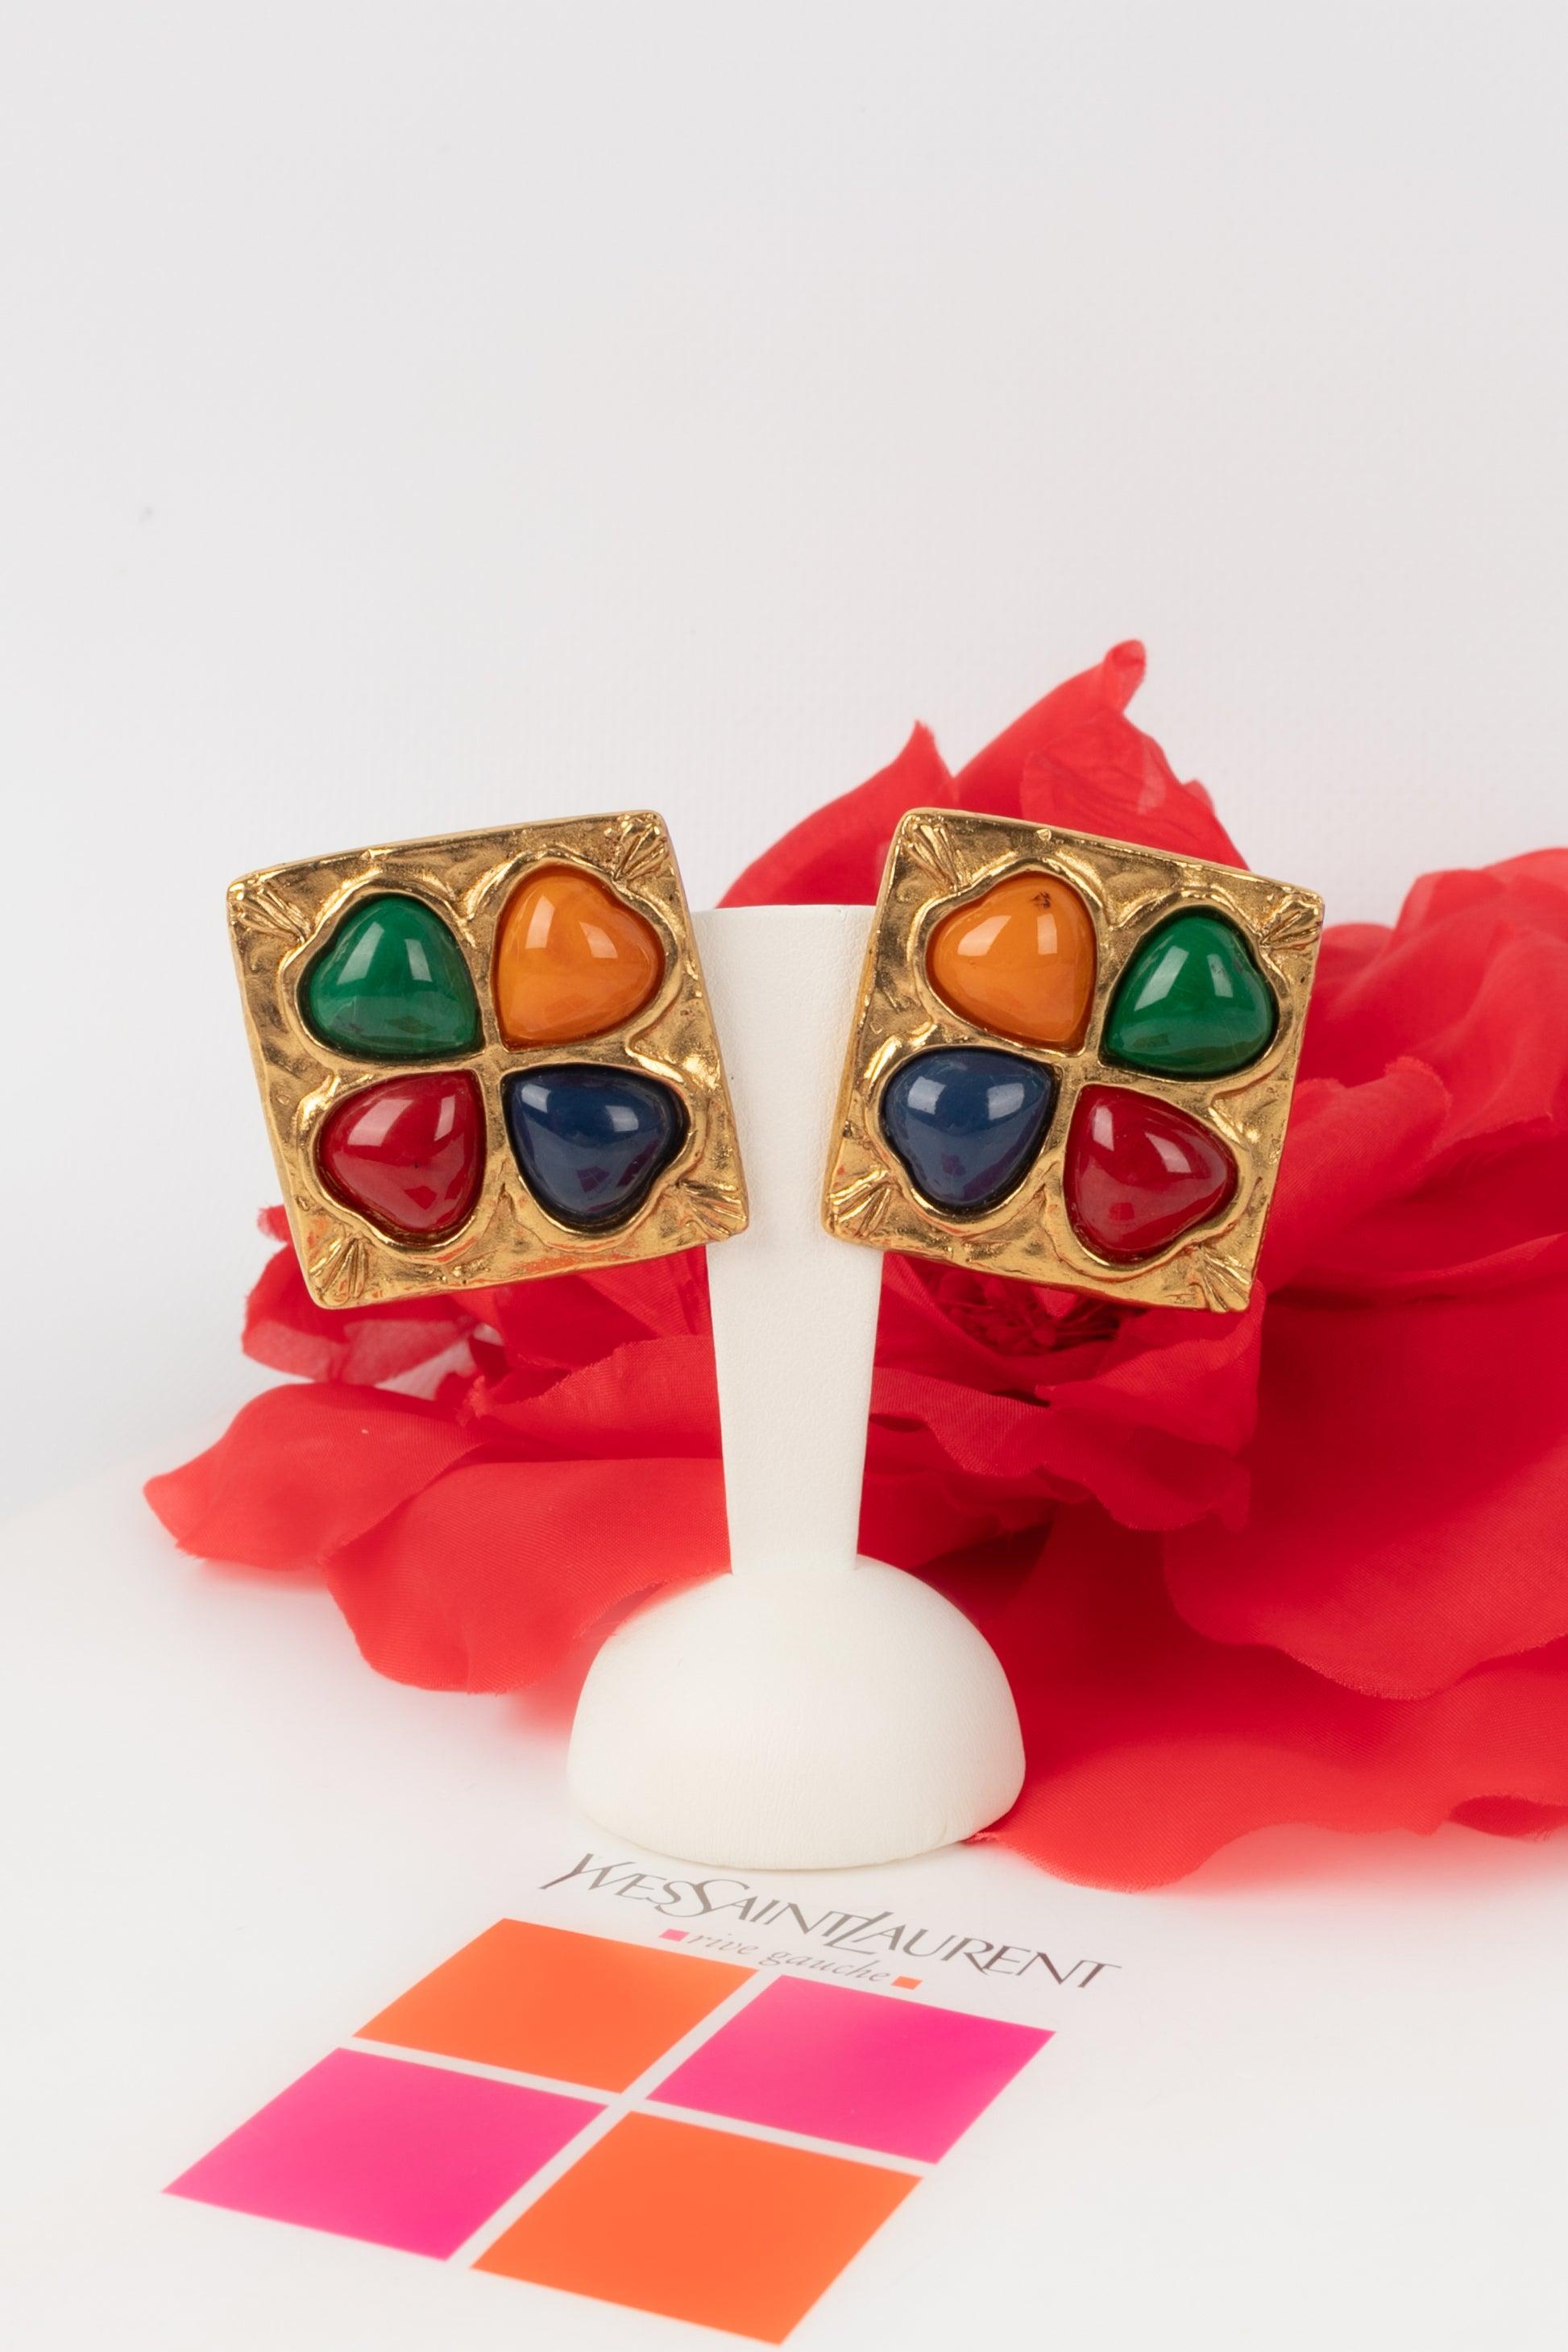 Yves Saint Laurent Golden Metal Clip-On Earrings w/ Glass Paste Cabochons, 1980s For Sale 2